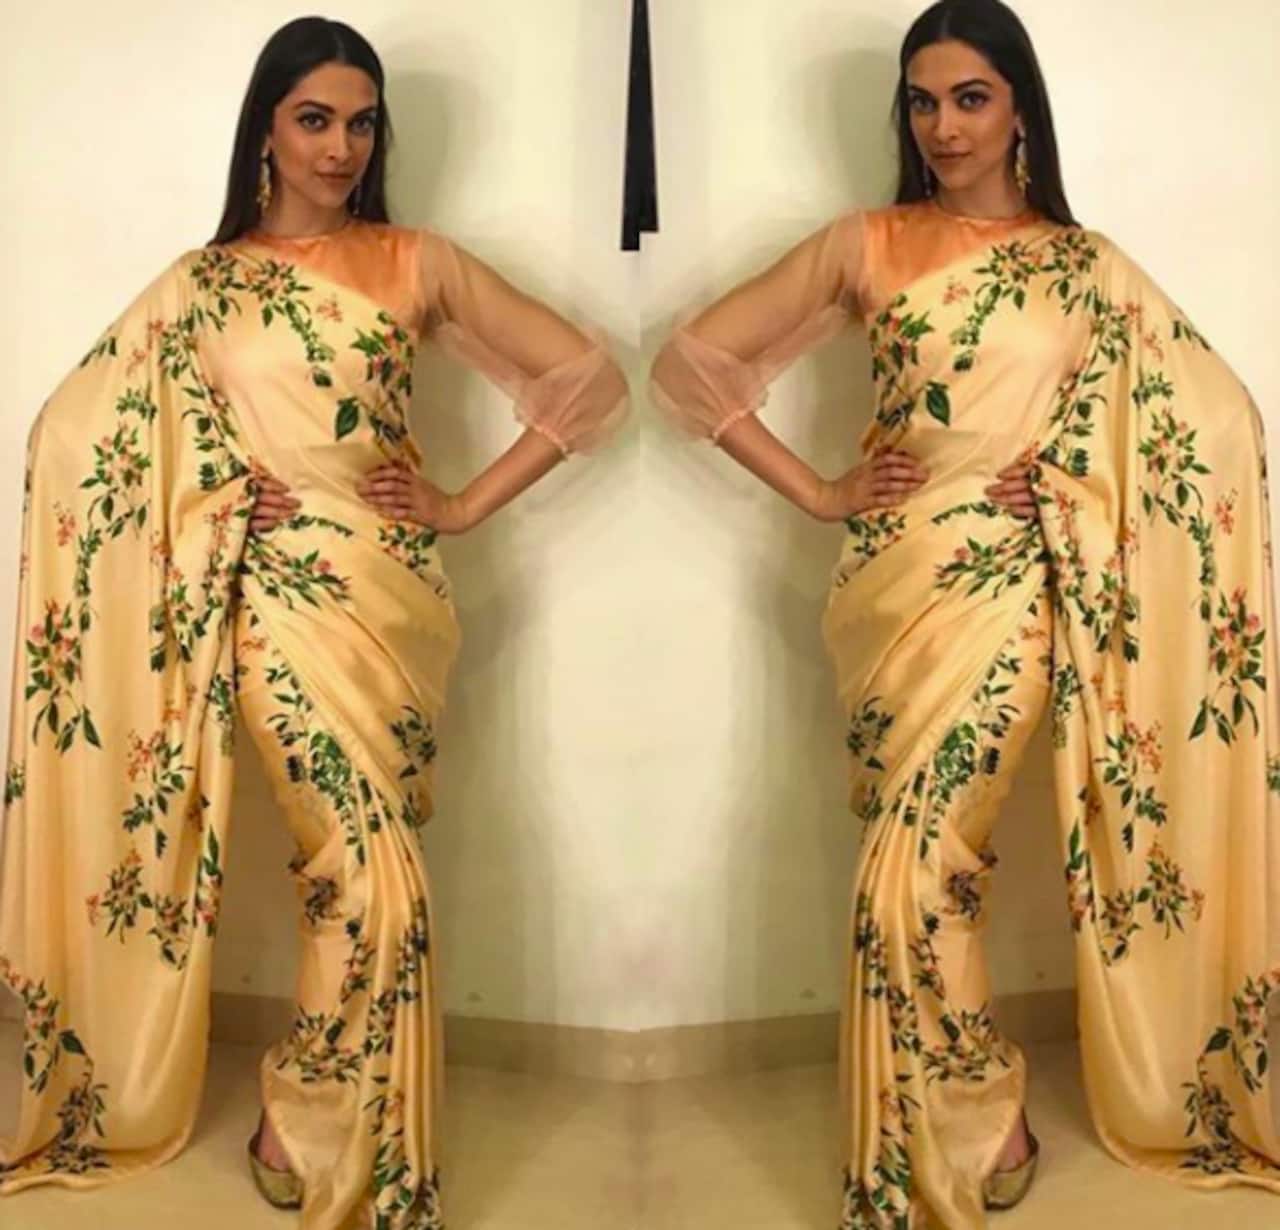 Finally! Deepika Padukone brings back her saree love for Padmavati promotions and we can't thank her enough - view pic